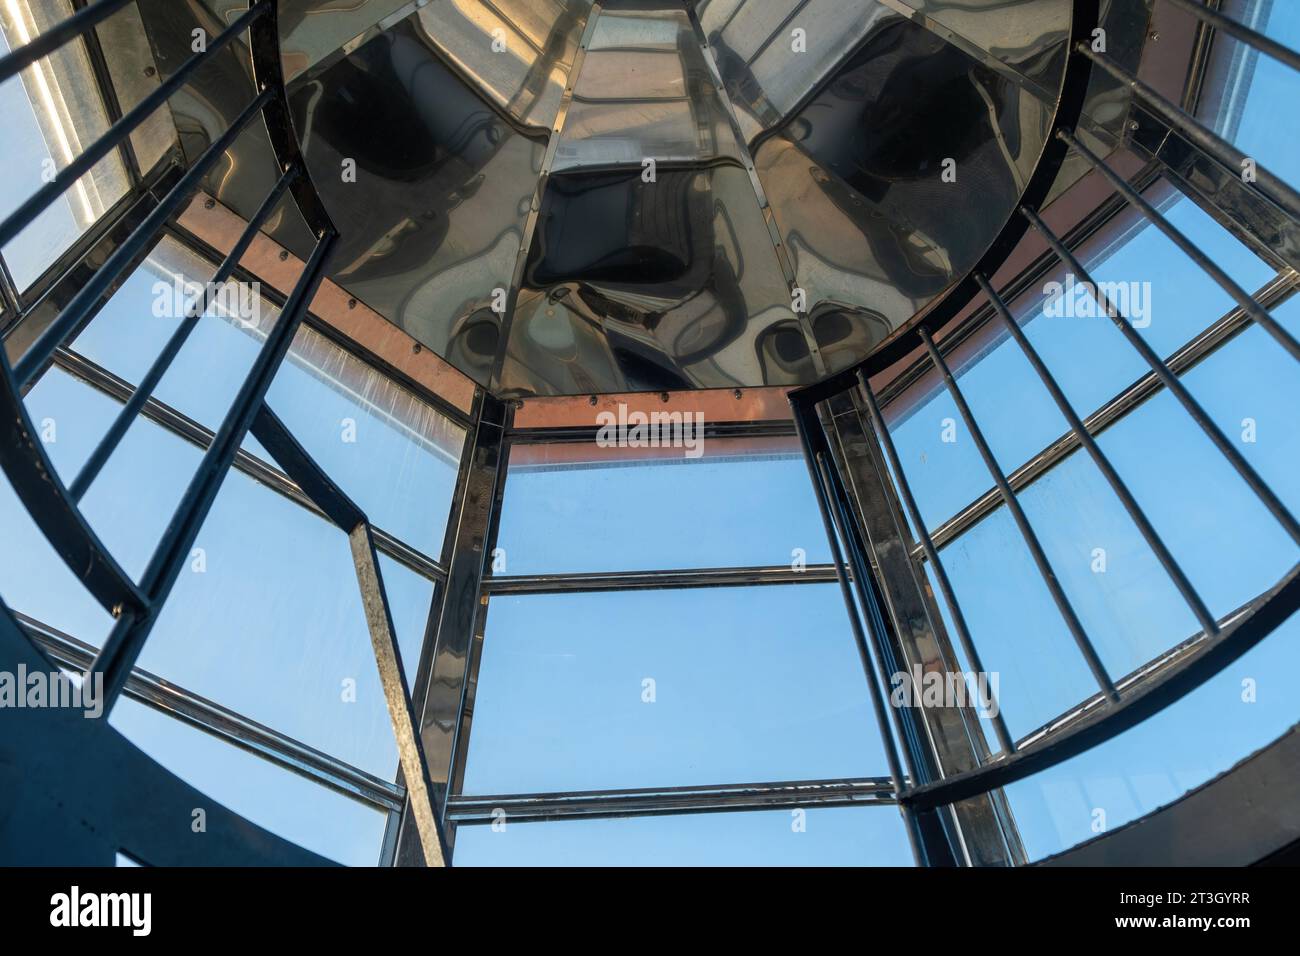 Interior top of Gavdos Lighthouse, Crete island Greece. Under view from ladder end of metal reflective frame construction and blue sky. Stock Photo